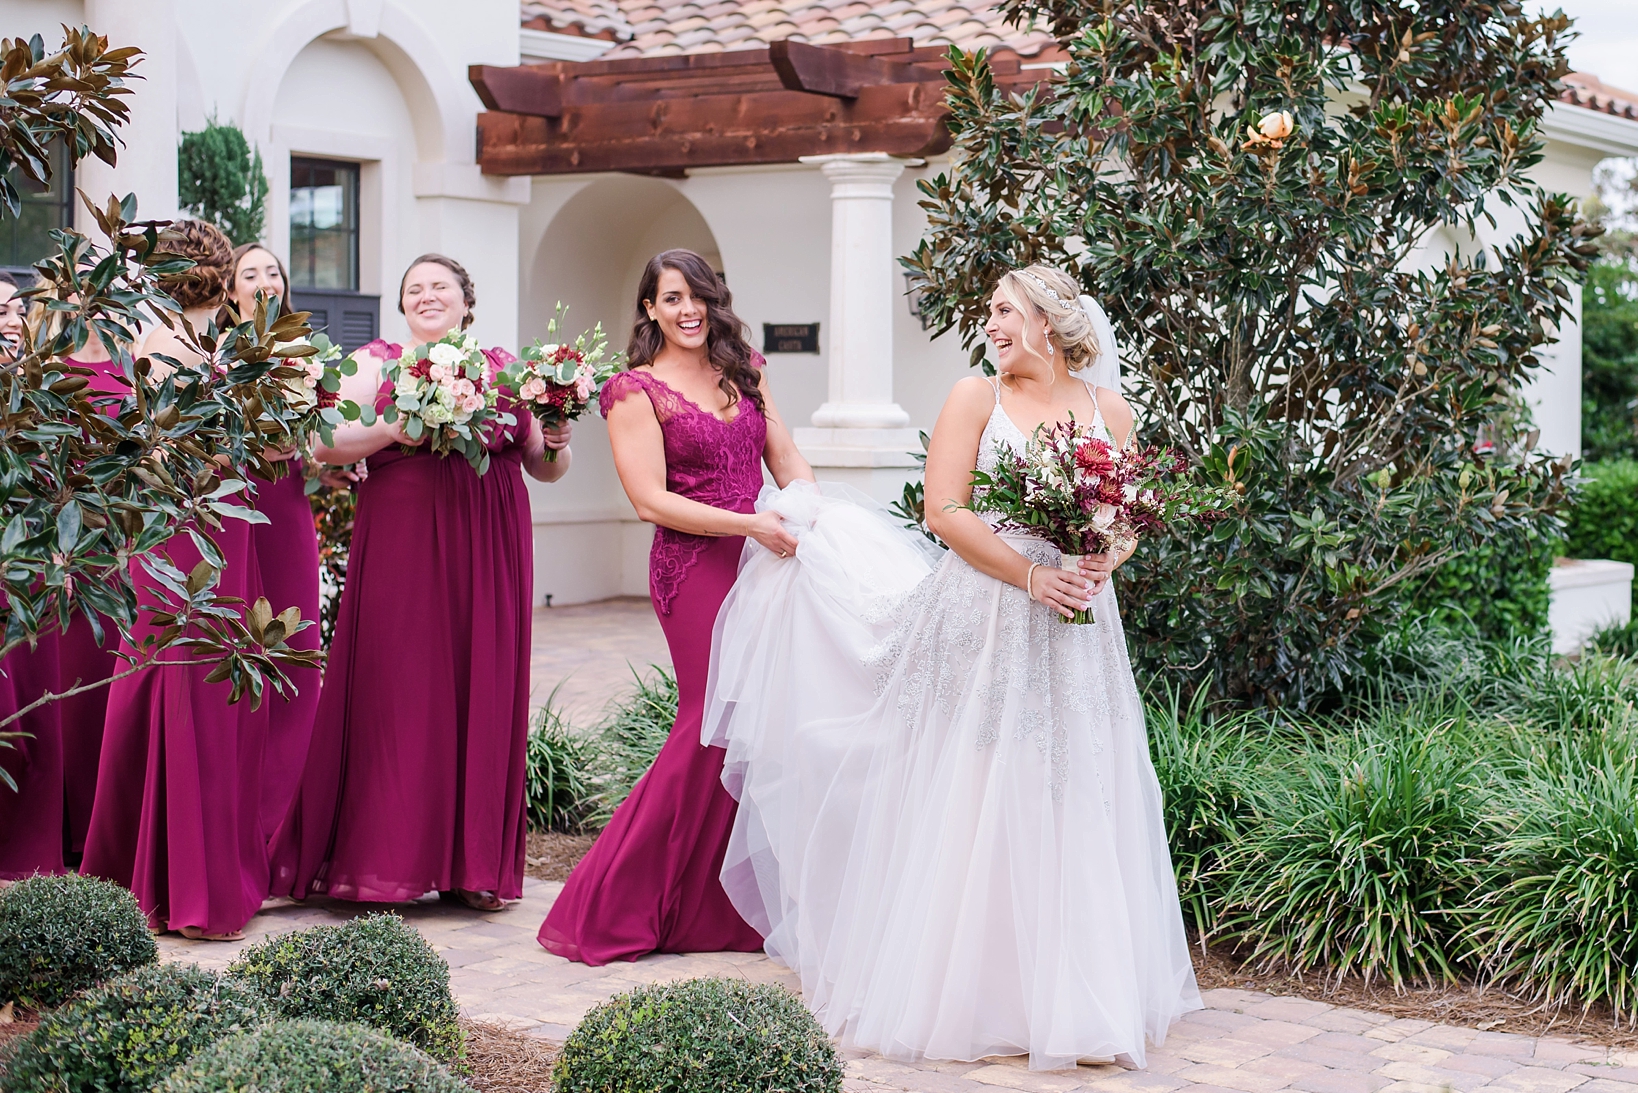 A candid moment between the Bride and Her Bridesmaids as they walk to the Ceremony